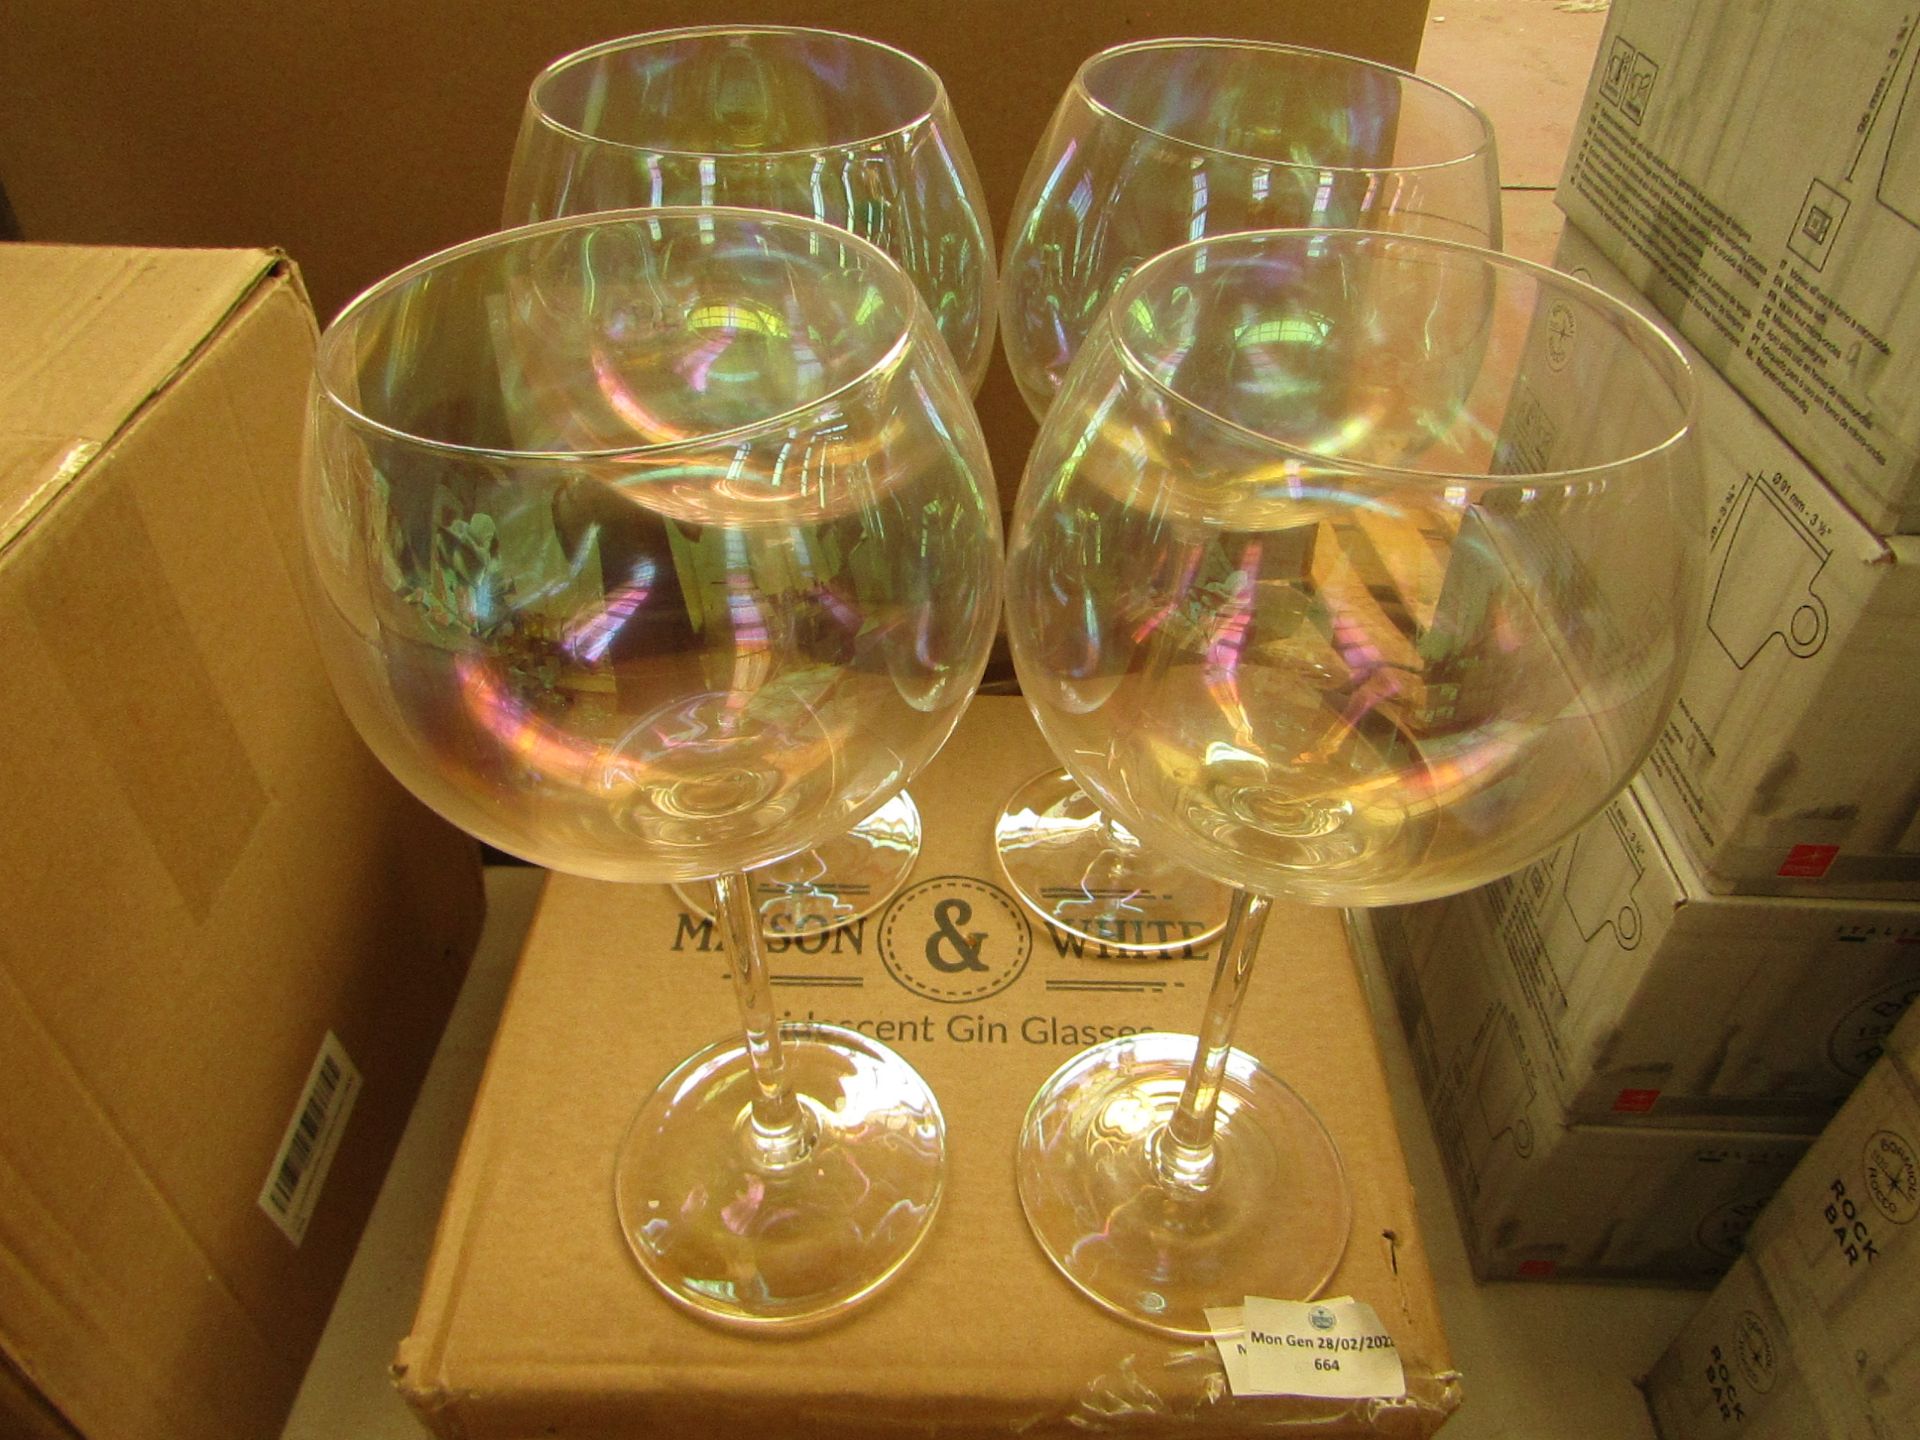 Maison & White - Set of Irdescent Gin Glasses - Good Condition & Boxed.